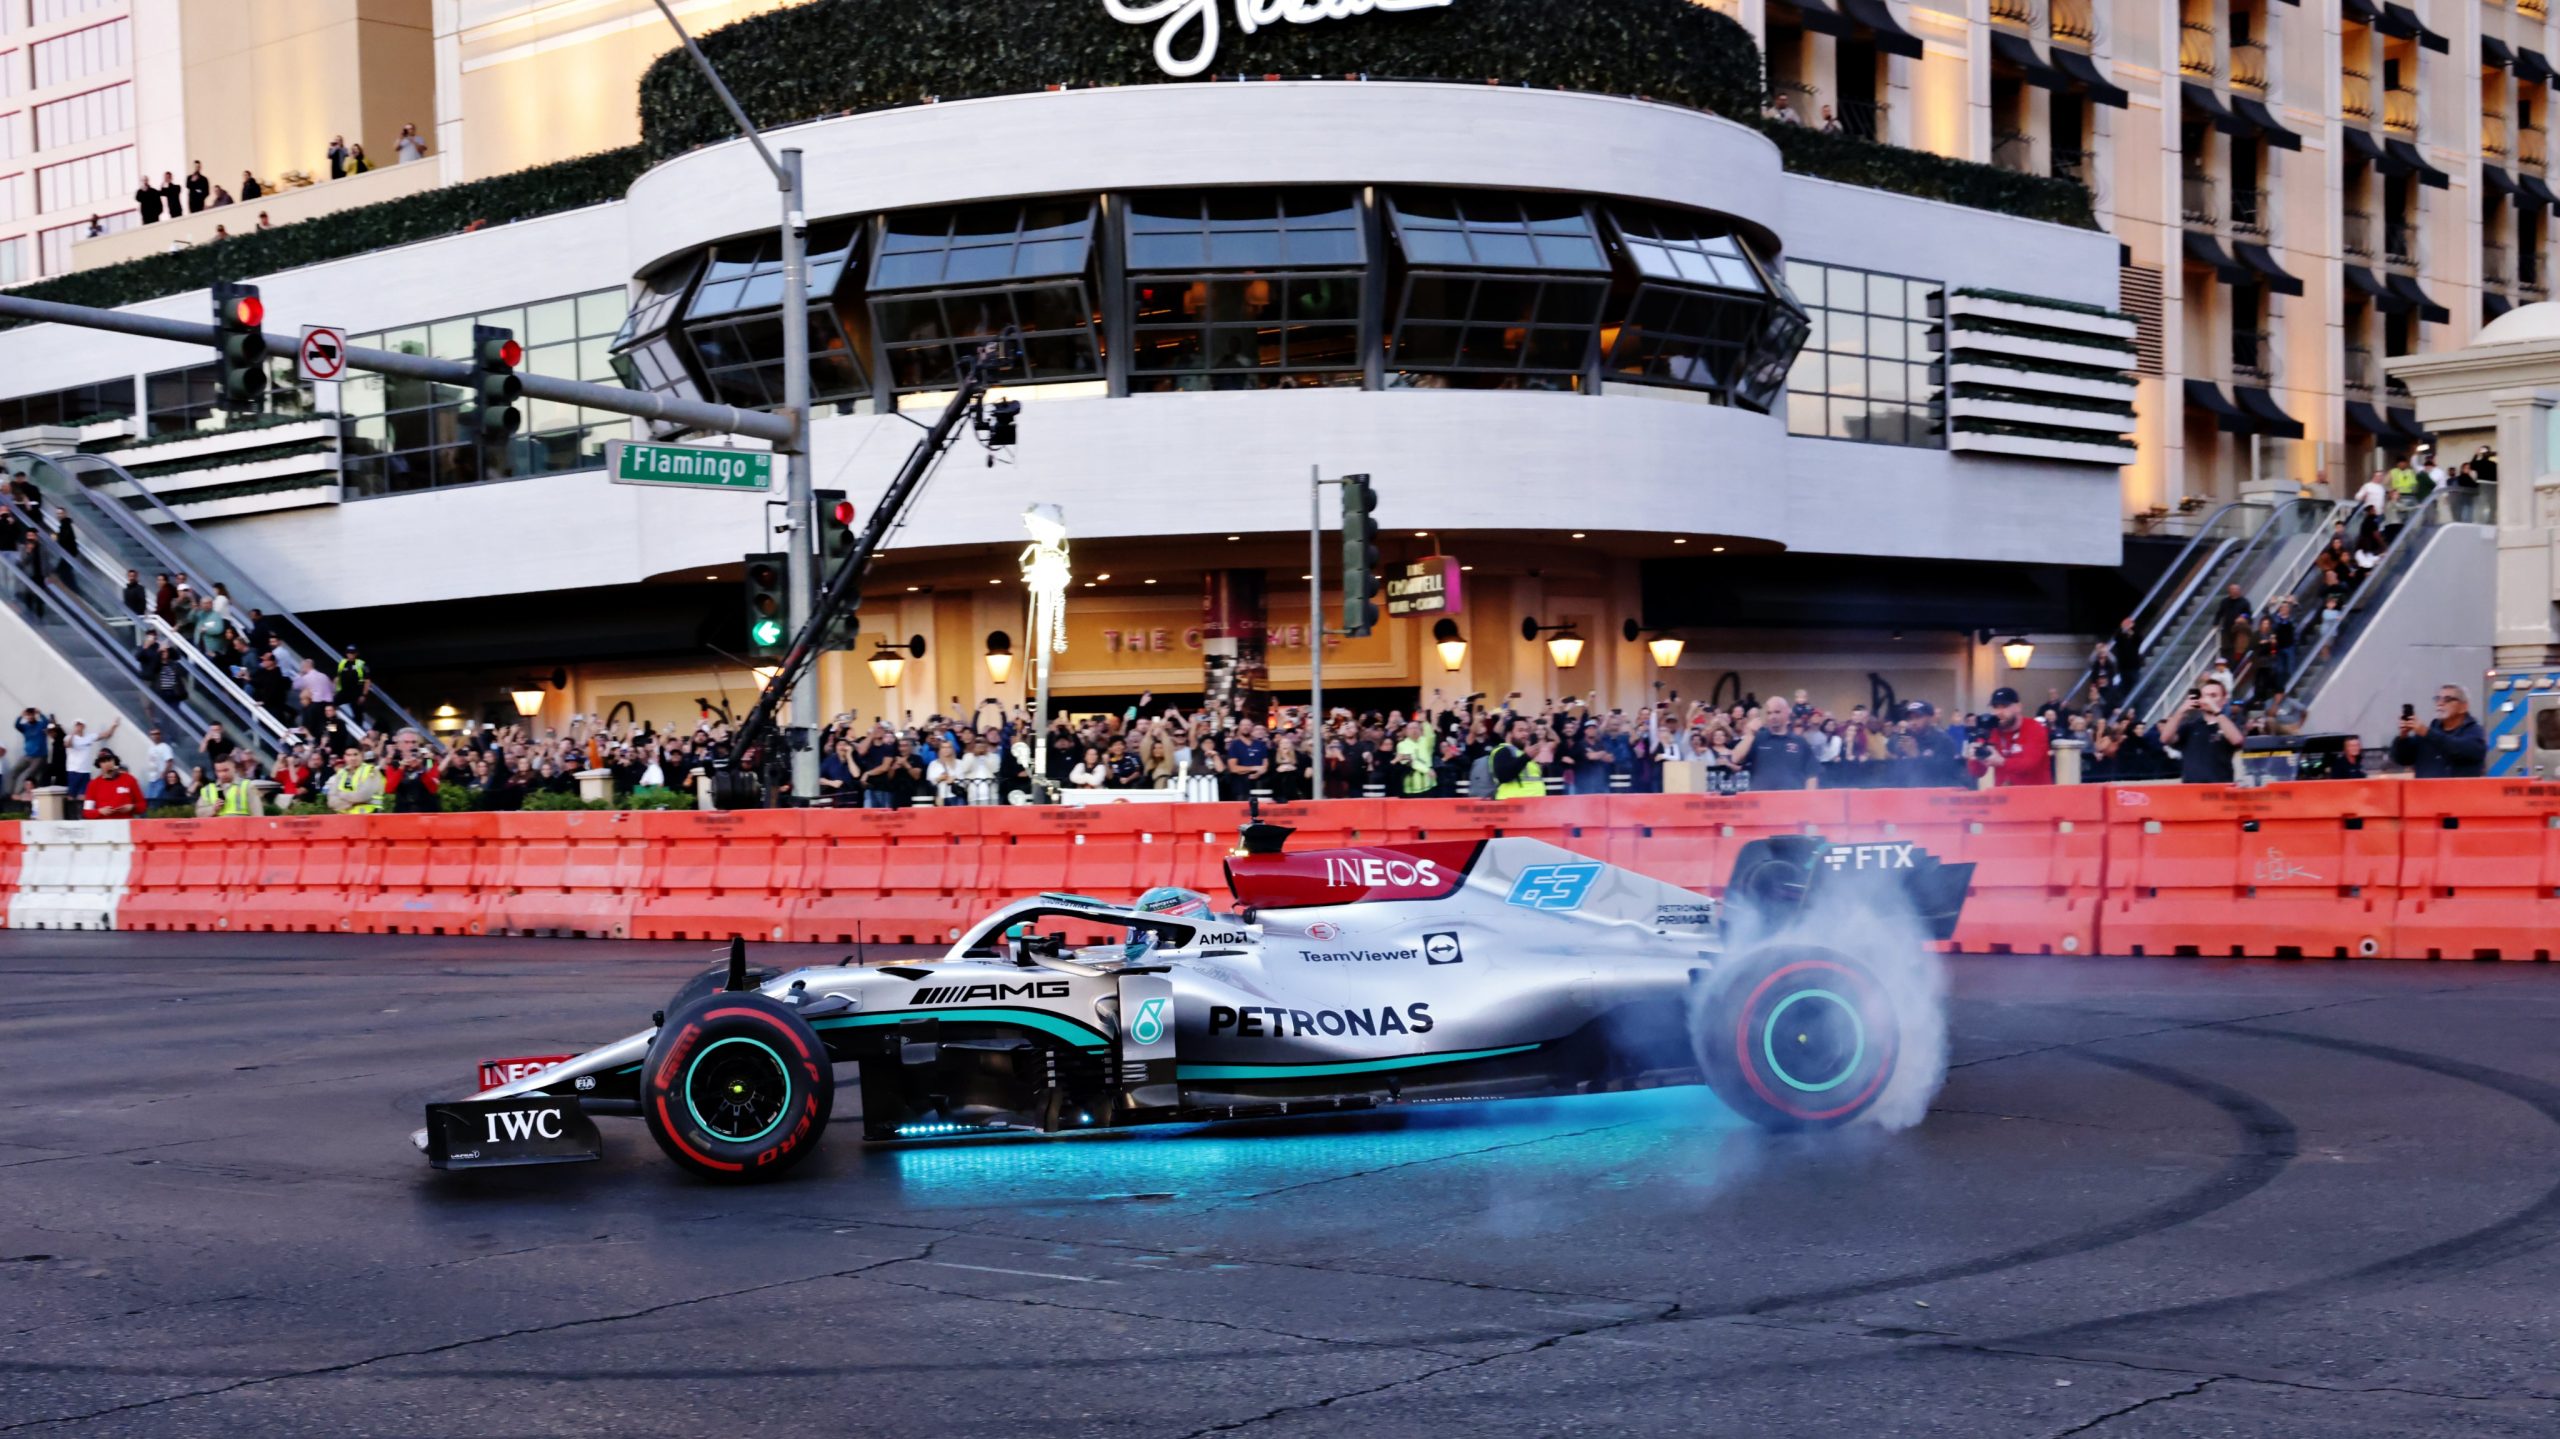 F1 hits the jackpot with Vegas GP launch party BVM Sports